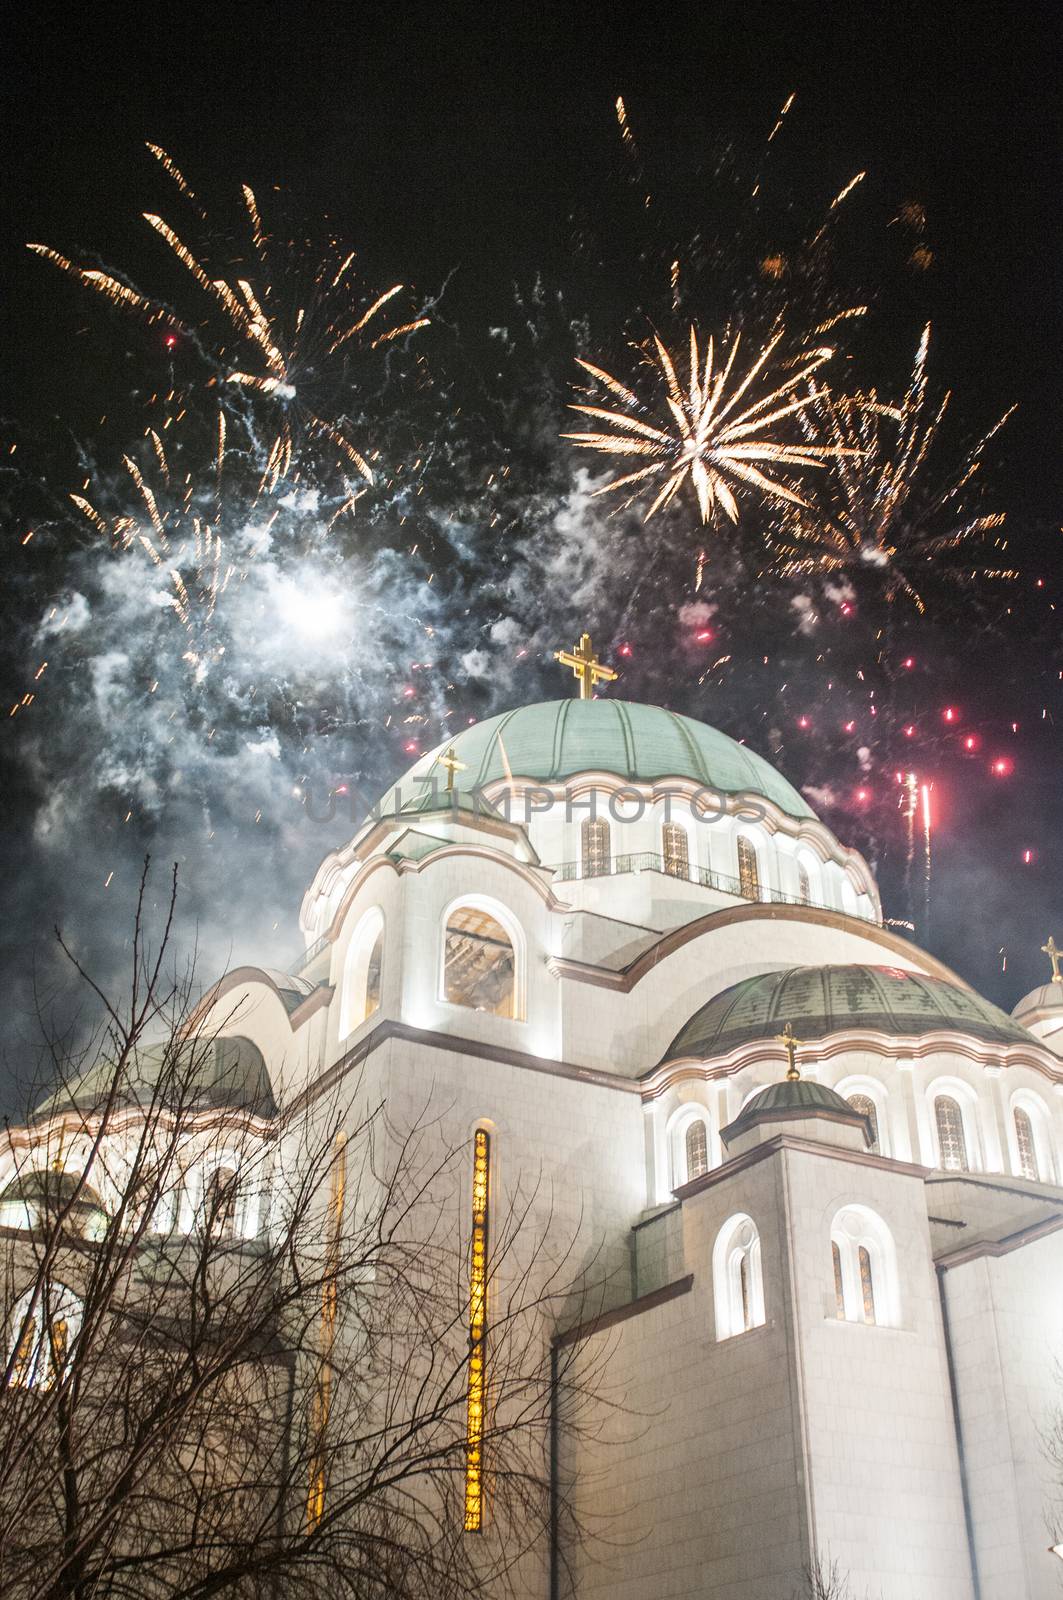 BELGRADE - JANUARY 13: Serbian New years eve celebration in front of the St. Sava's temple with fireworks at midnight in Belgrade, Serbia on January 13, 2013